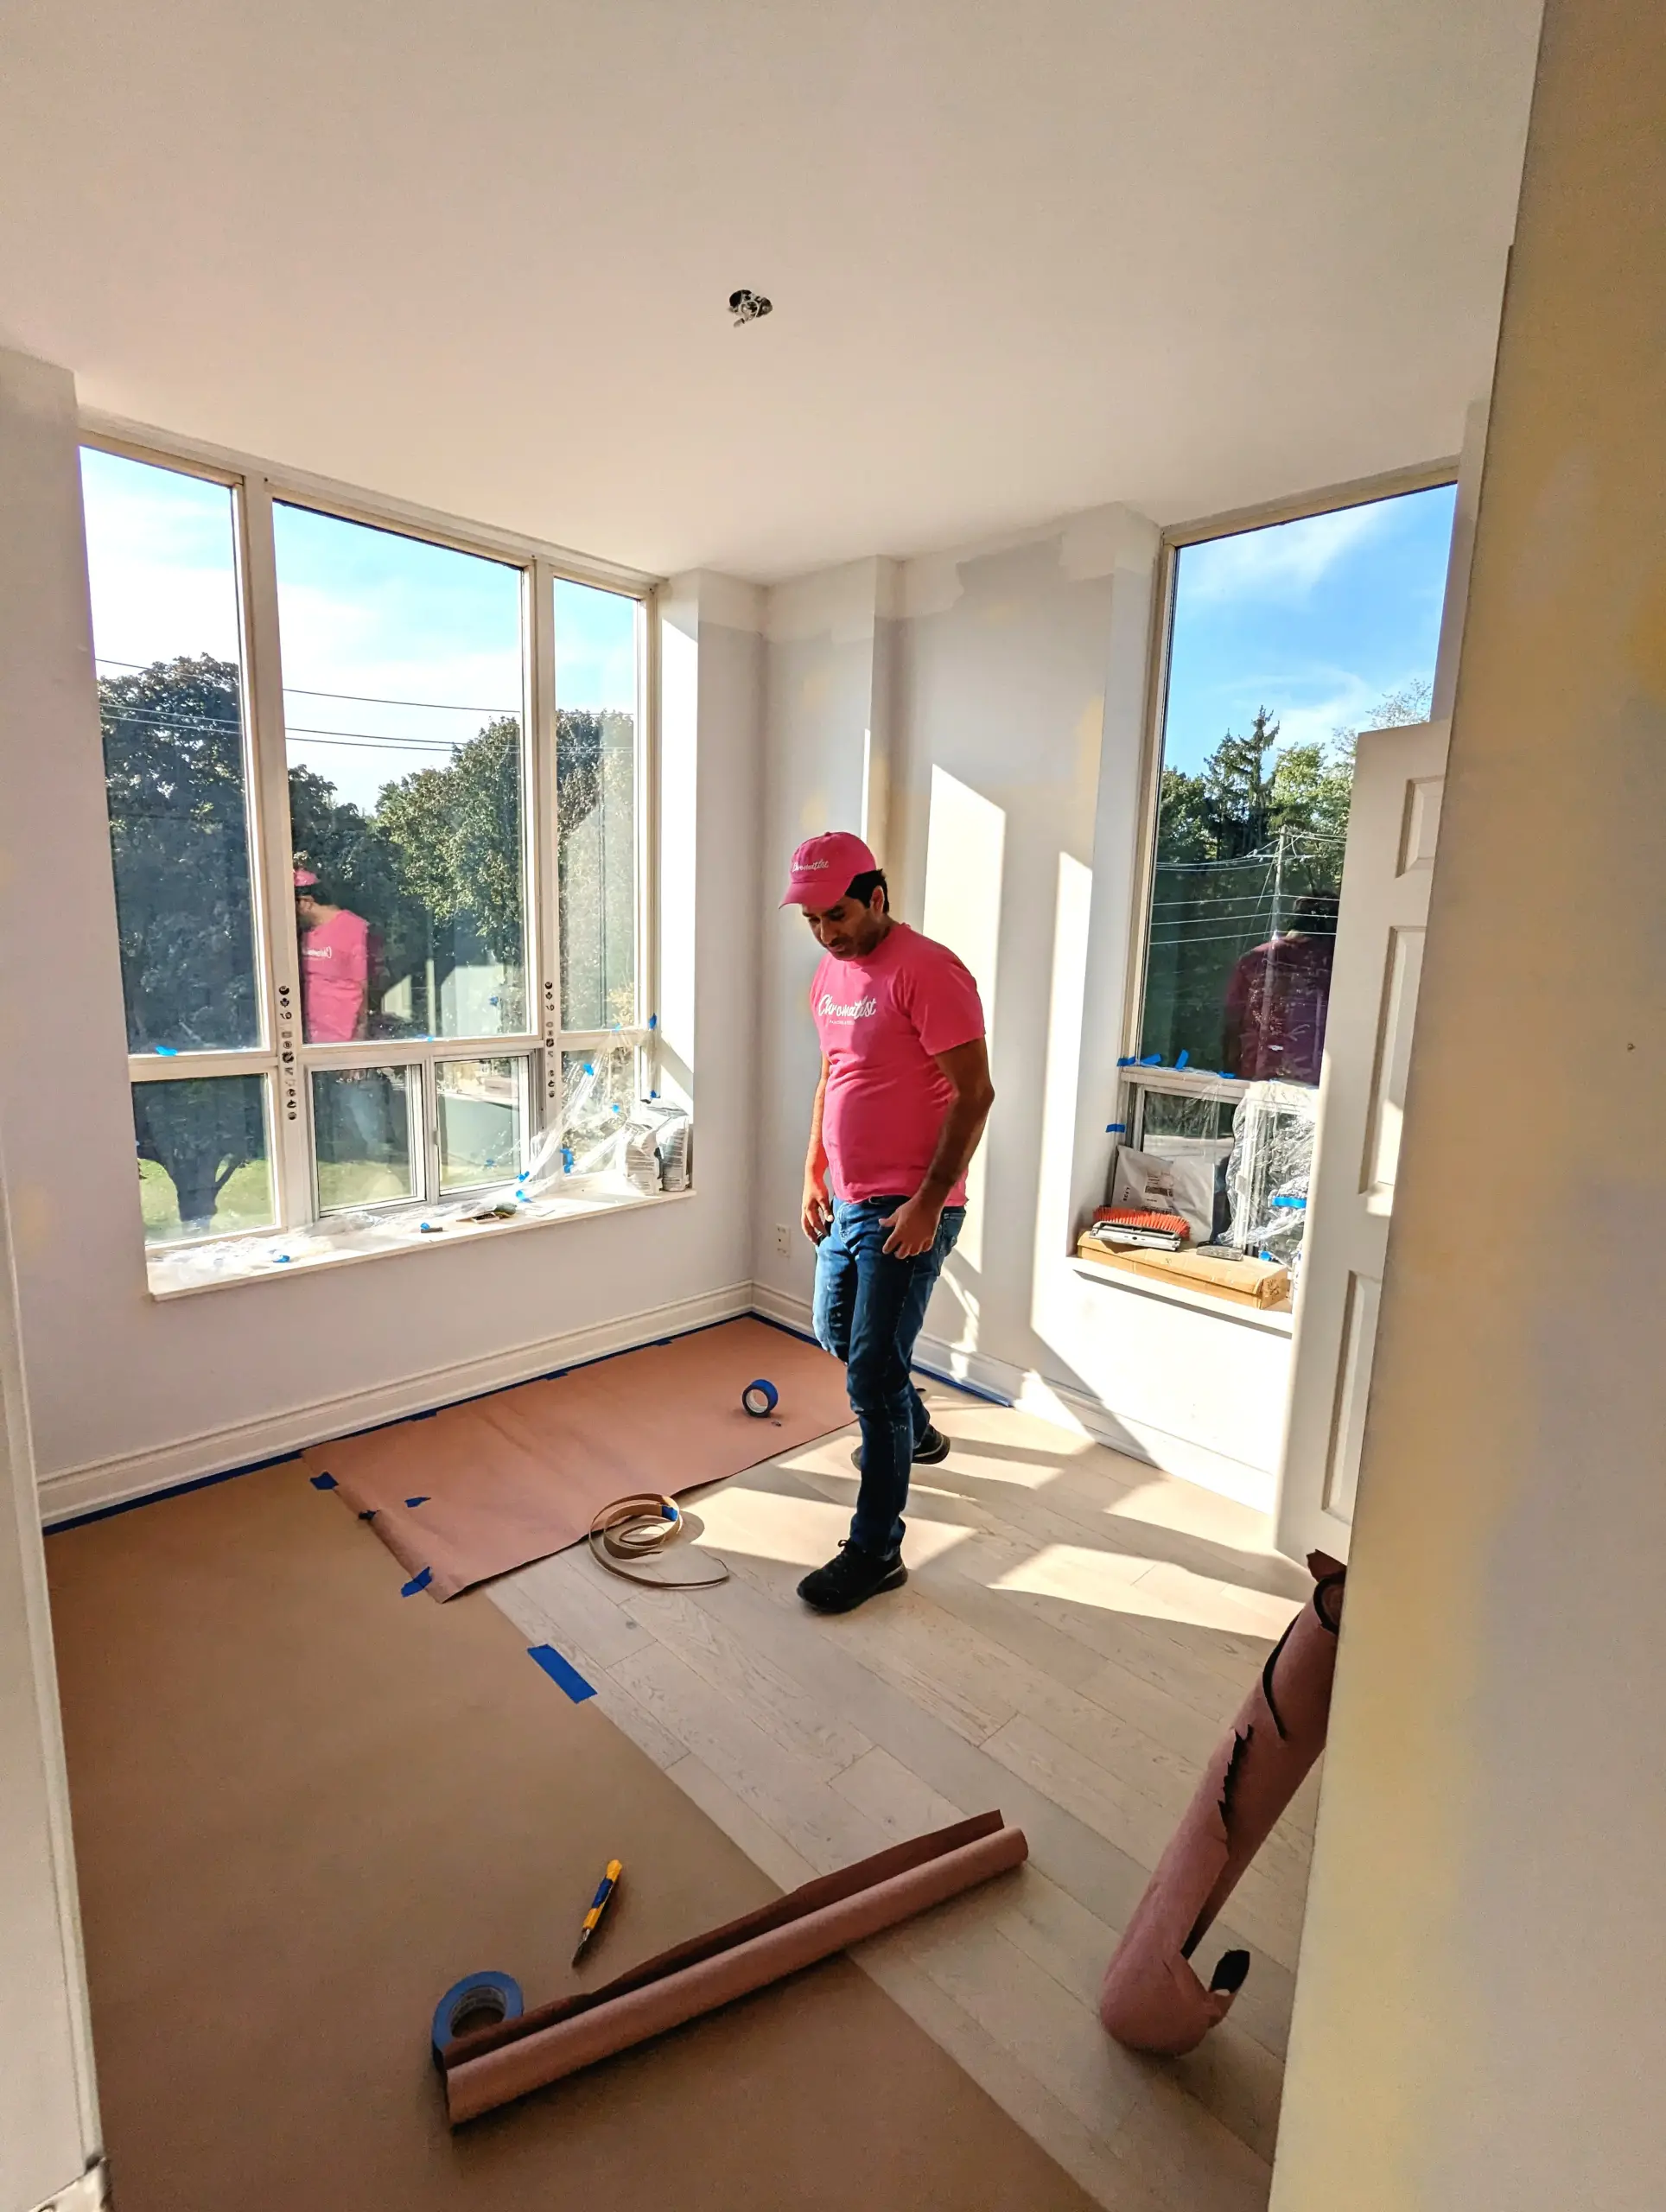 Chromatist condo painters giving a fresh look to a Foresthill apartment with full apartment painting services and new blinds installation. Getting this two bedroom and 2 bath ready for the new owners.